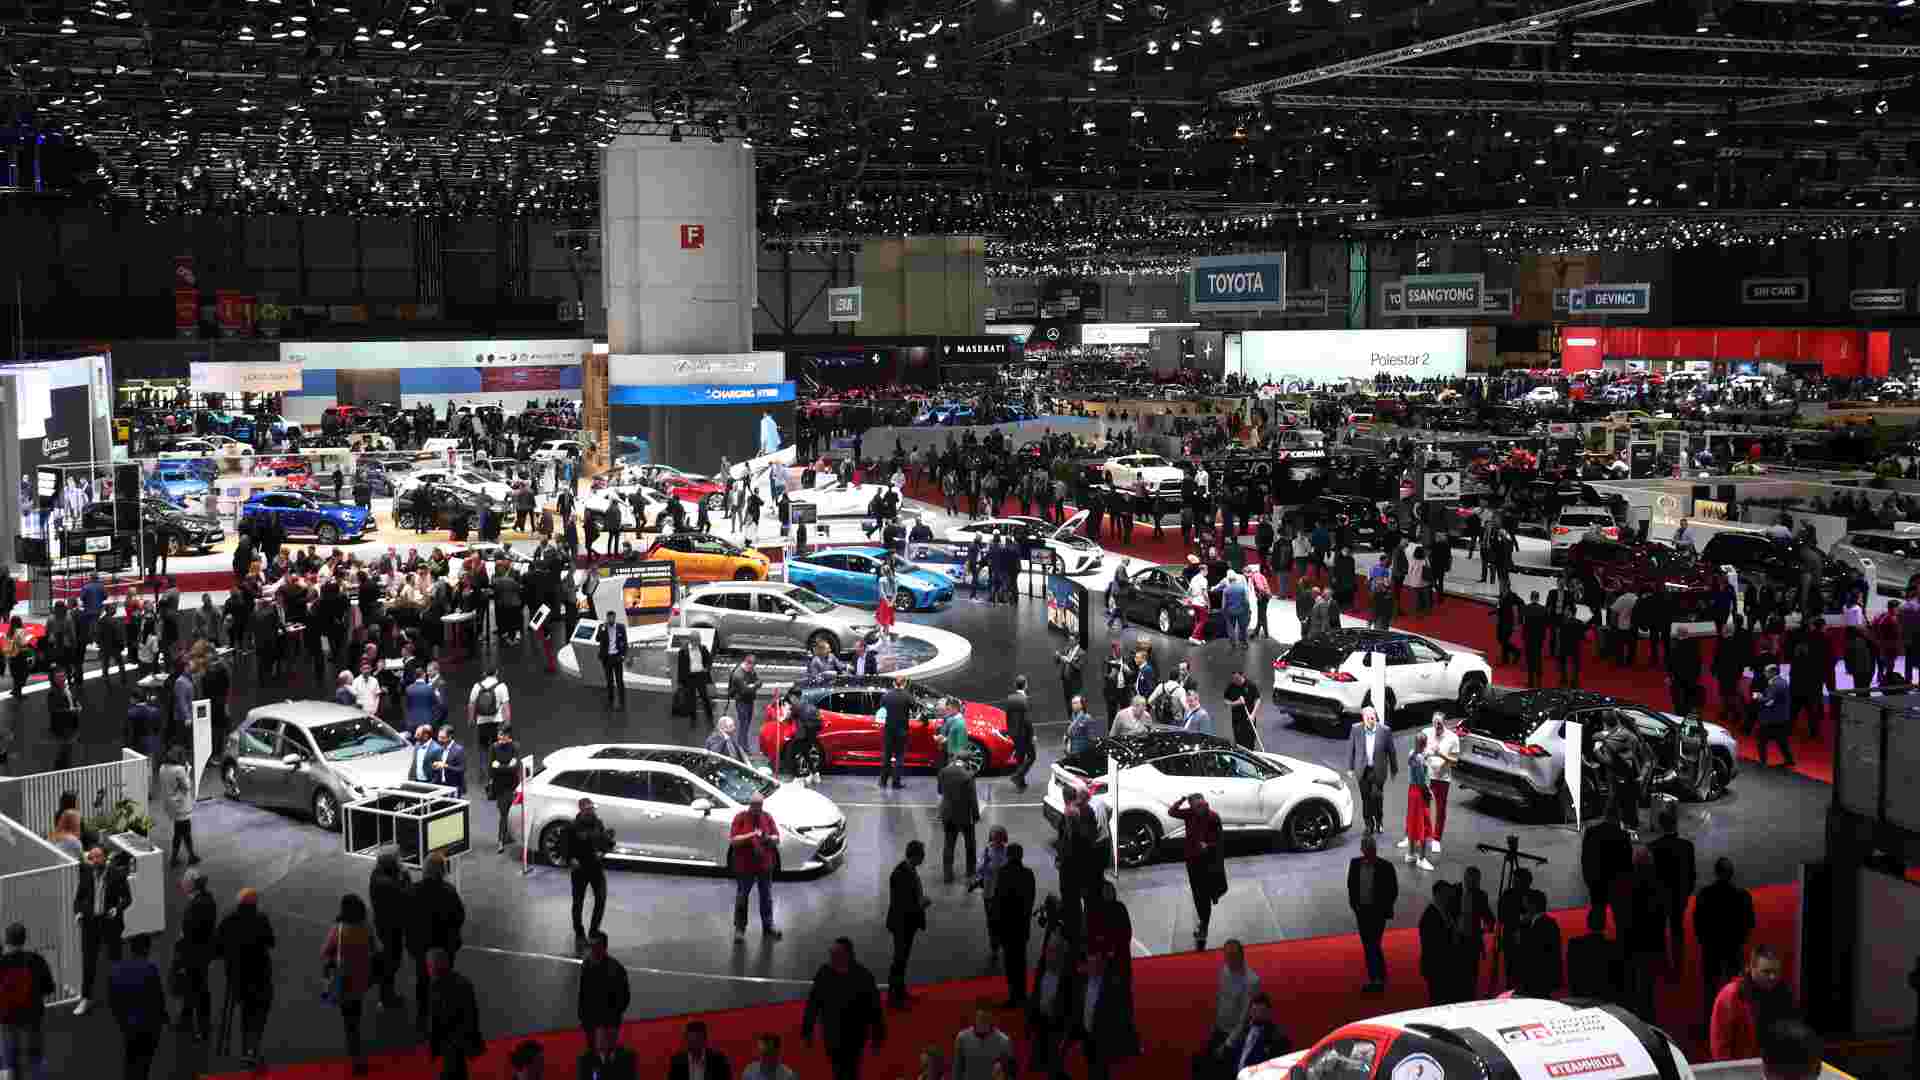 The most recent edition of the Geneva motor show was held in 2019. Image: Newspress